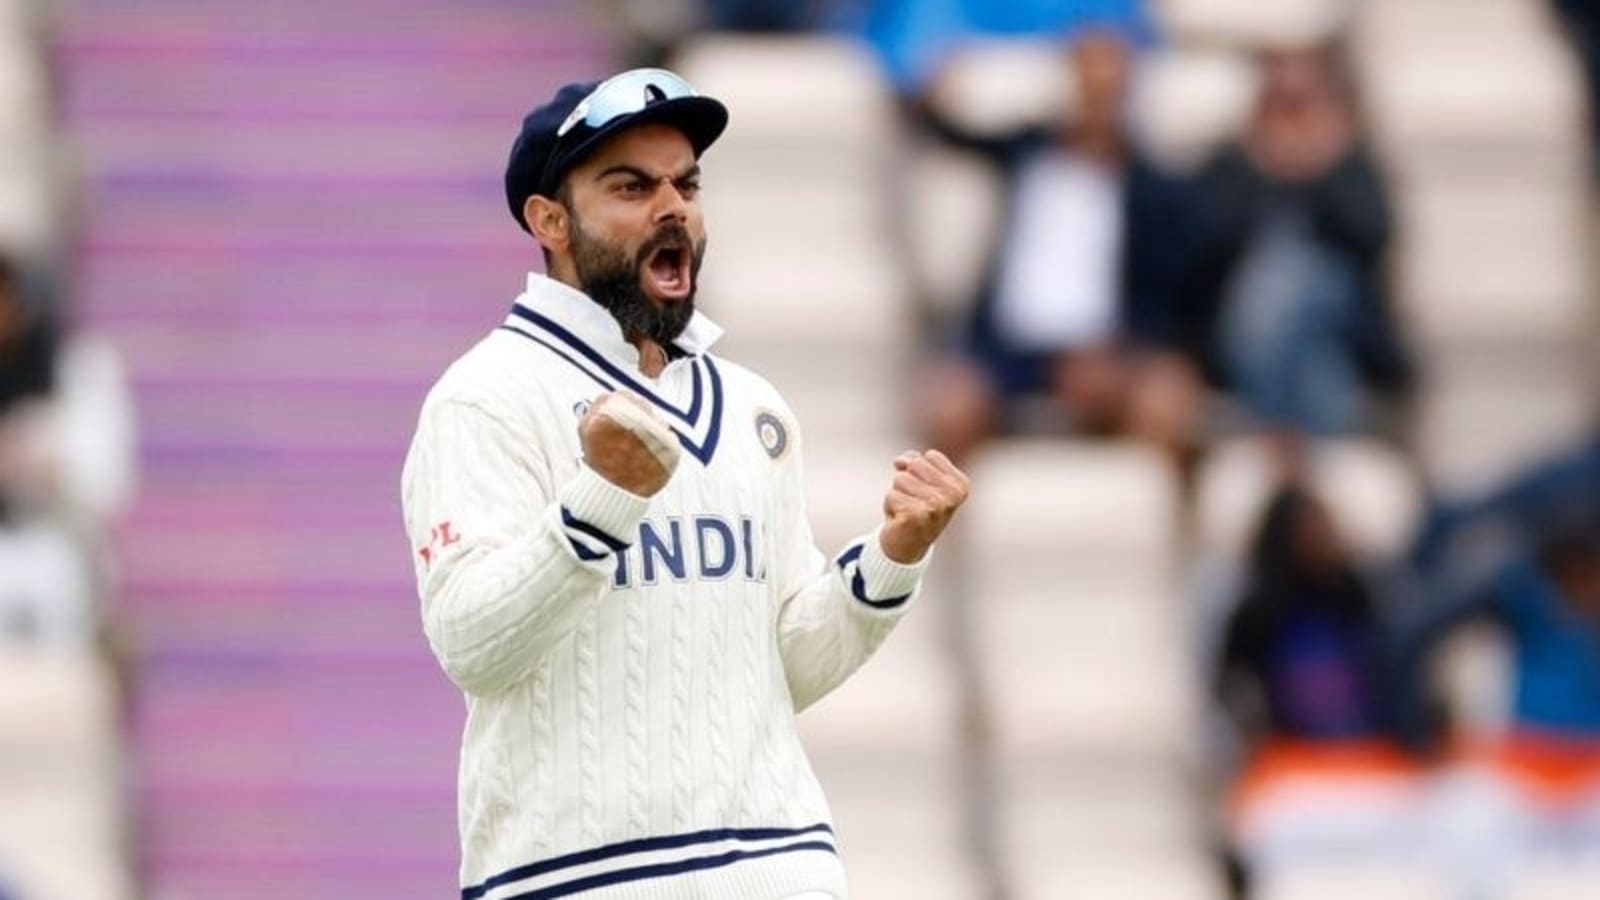 Virat Kohli and 18: A connection beyond just a jersey number